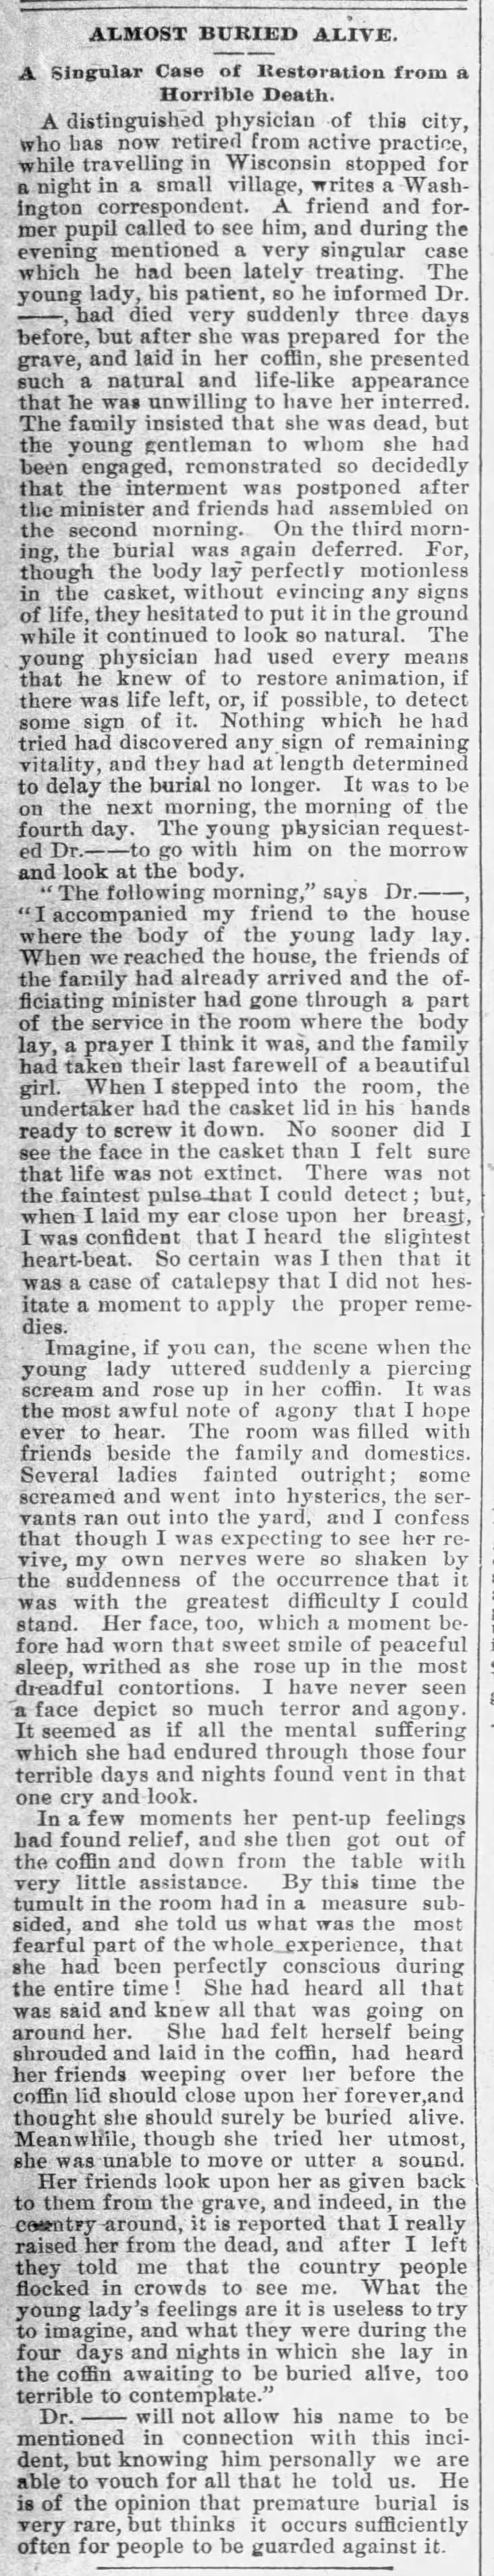 1883: "Almost Buried Alive"